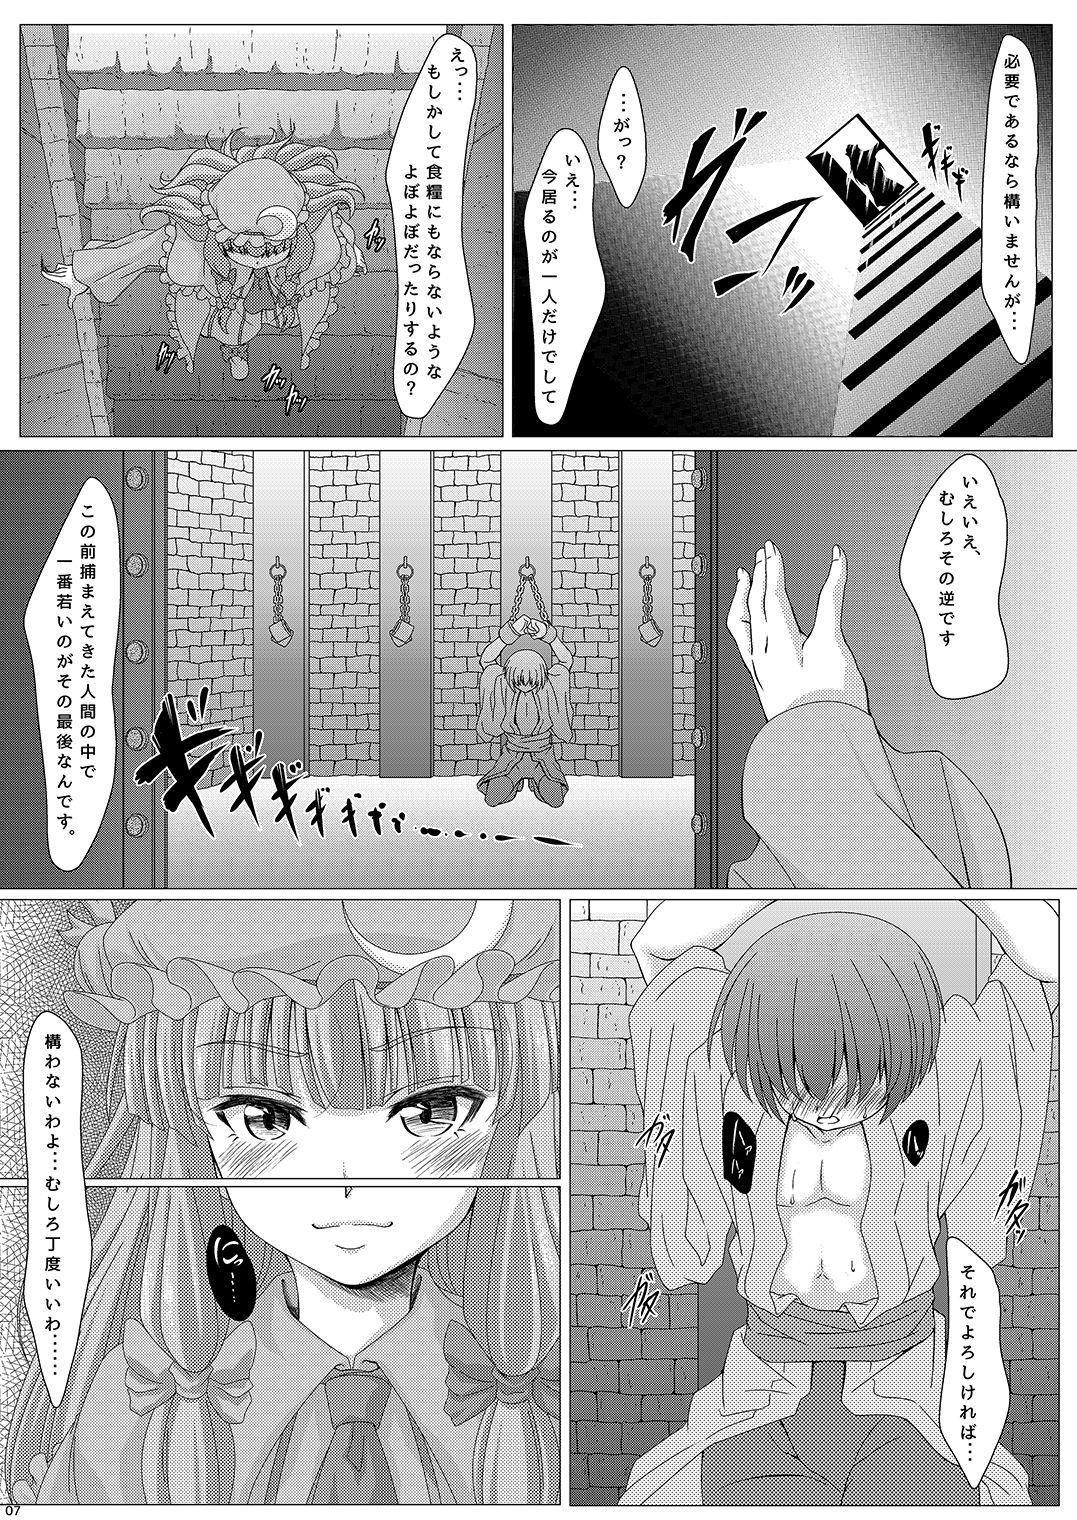 Hidden Touhouhimekamiden Ni - Touhou project Male - Page 6